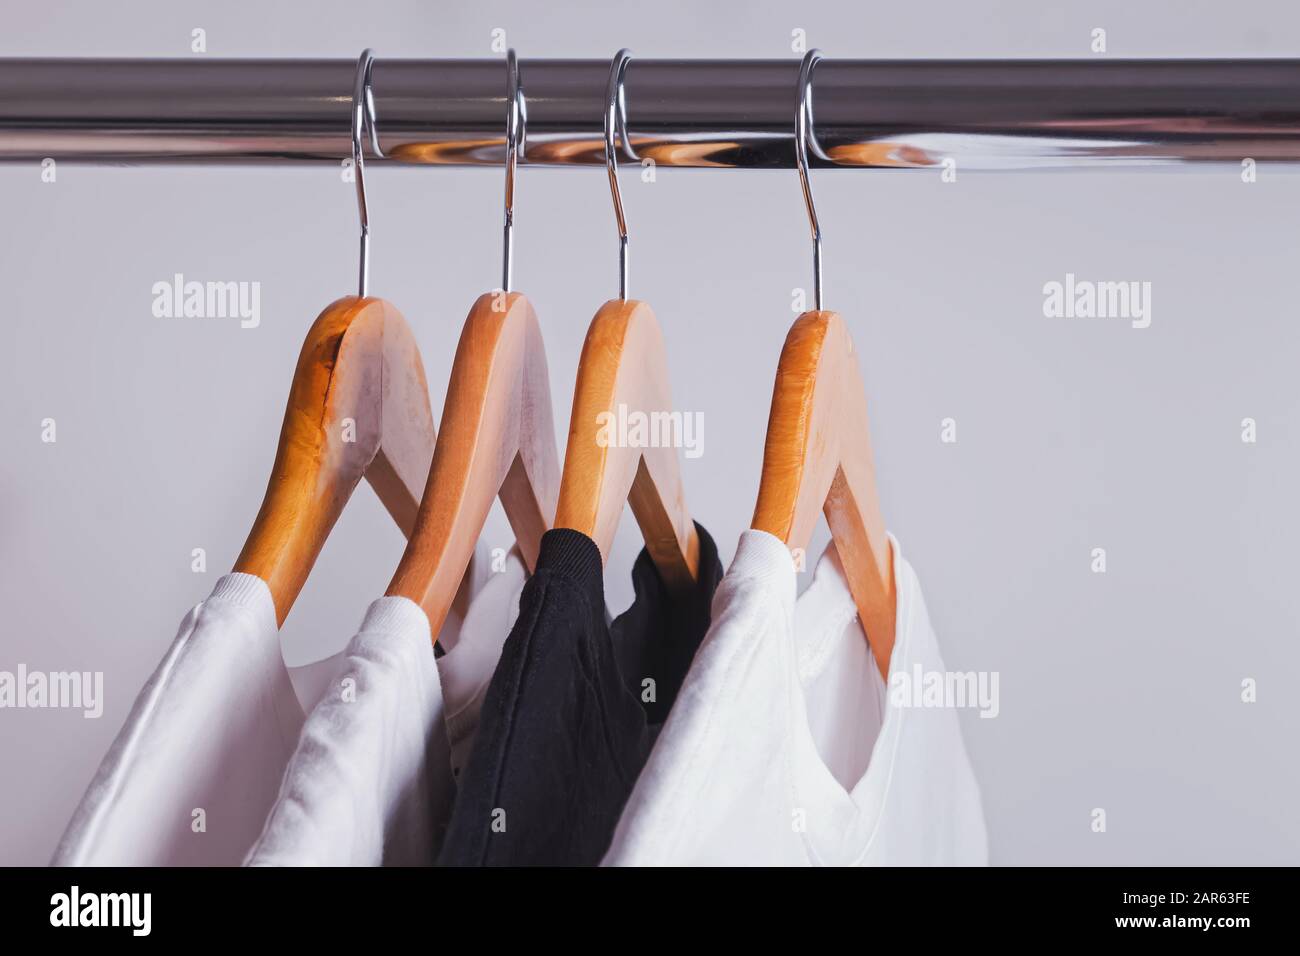 One black t-shirt in a row of white shirts hanging on wooden hangers Stock Photo